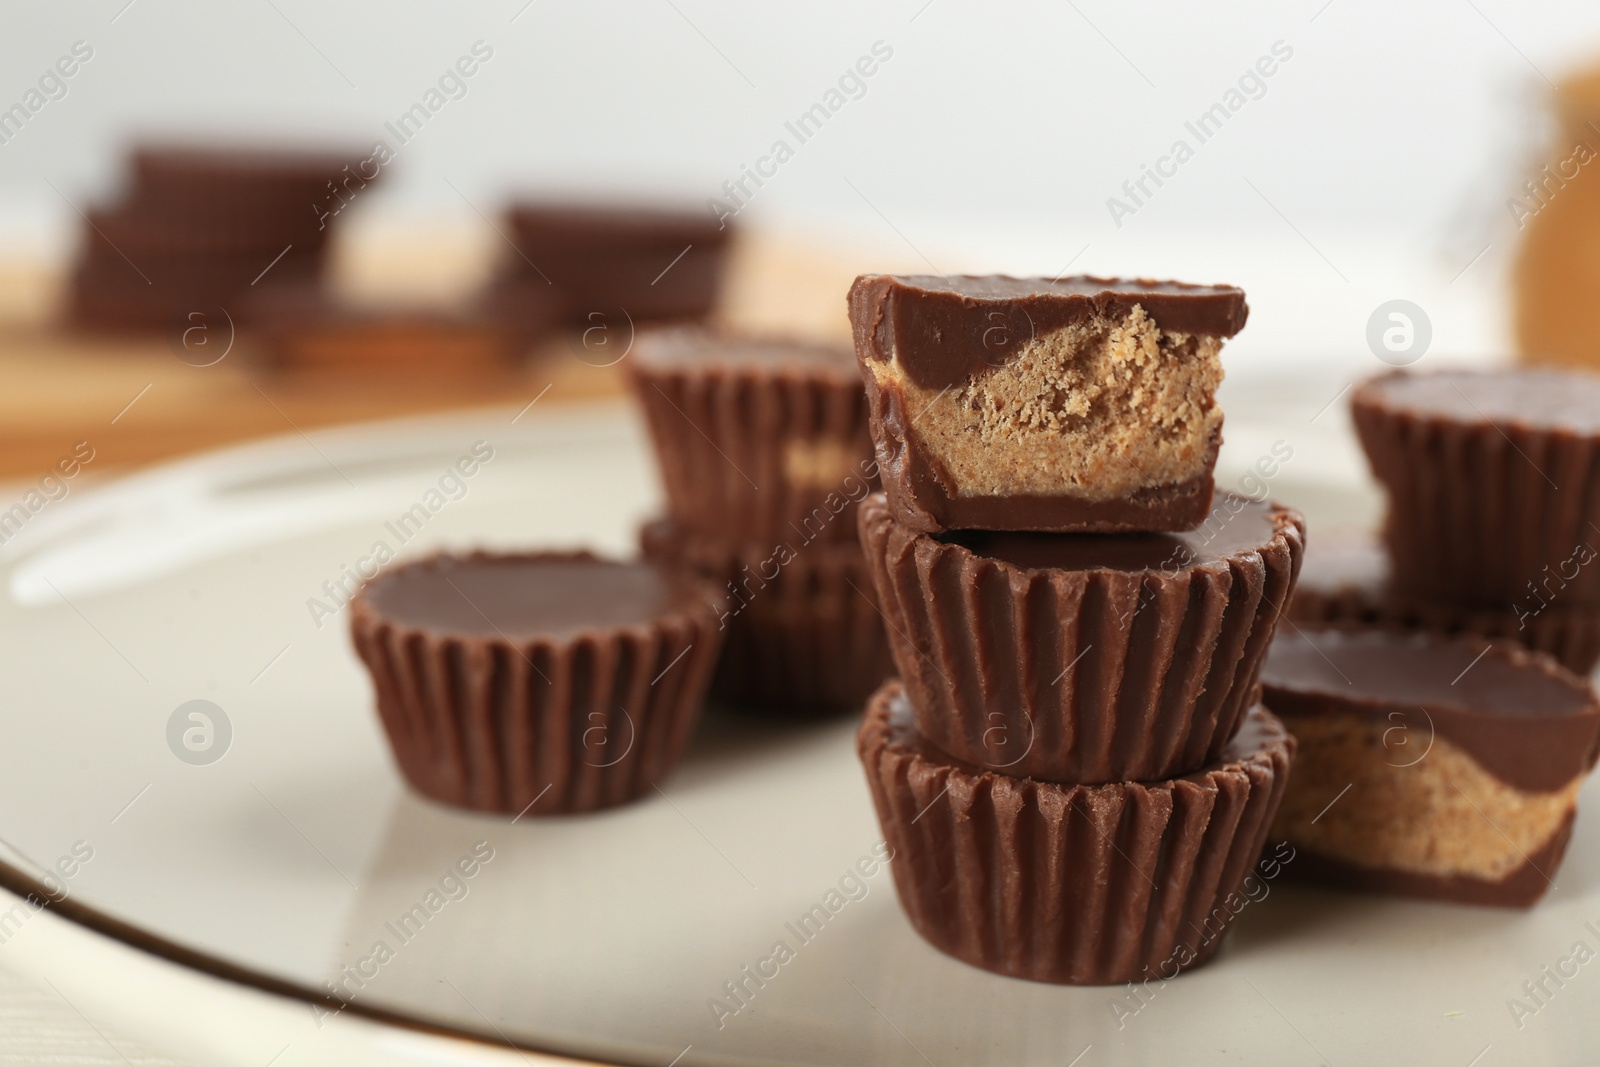 Photo of Cut and whole delicious peanut butter cups on plate, space for text